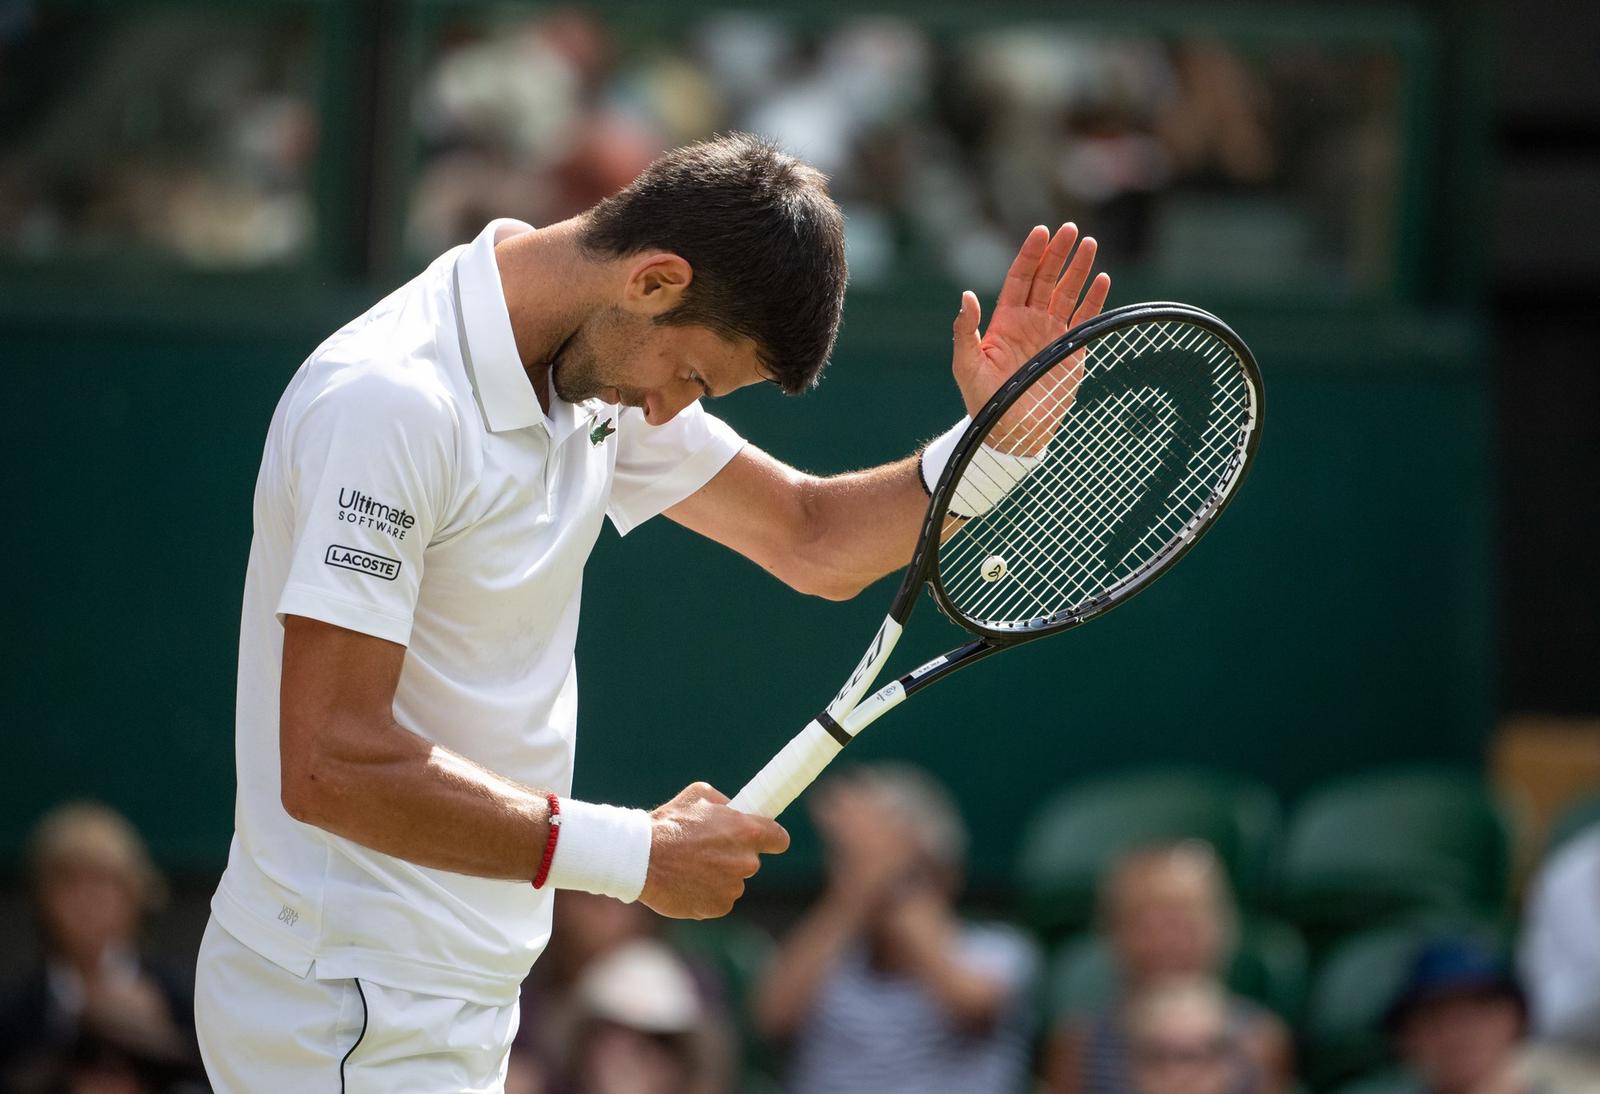 UPDATE 3-Tennis-Classy Djokovic charges into another Wimbledon final